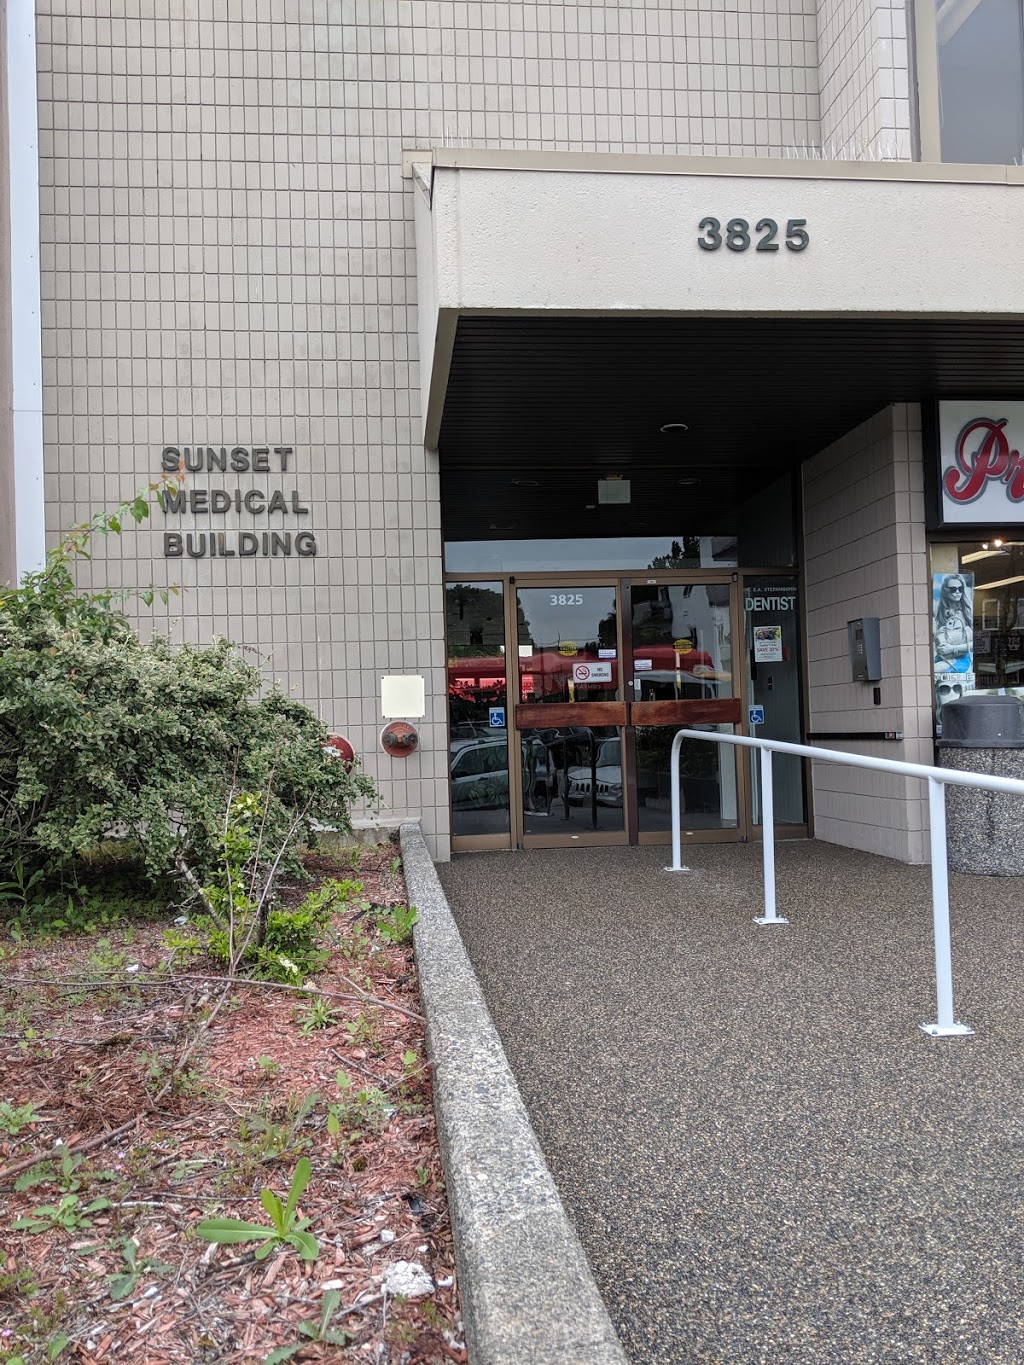 Burnaby Orthopedic Surgery Inc | doctor | 106 – 3825 Sunset St, Burnaby, BC V5G 1T4, Canada | 6044379600 OR +1 604-437-9600